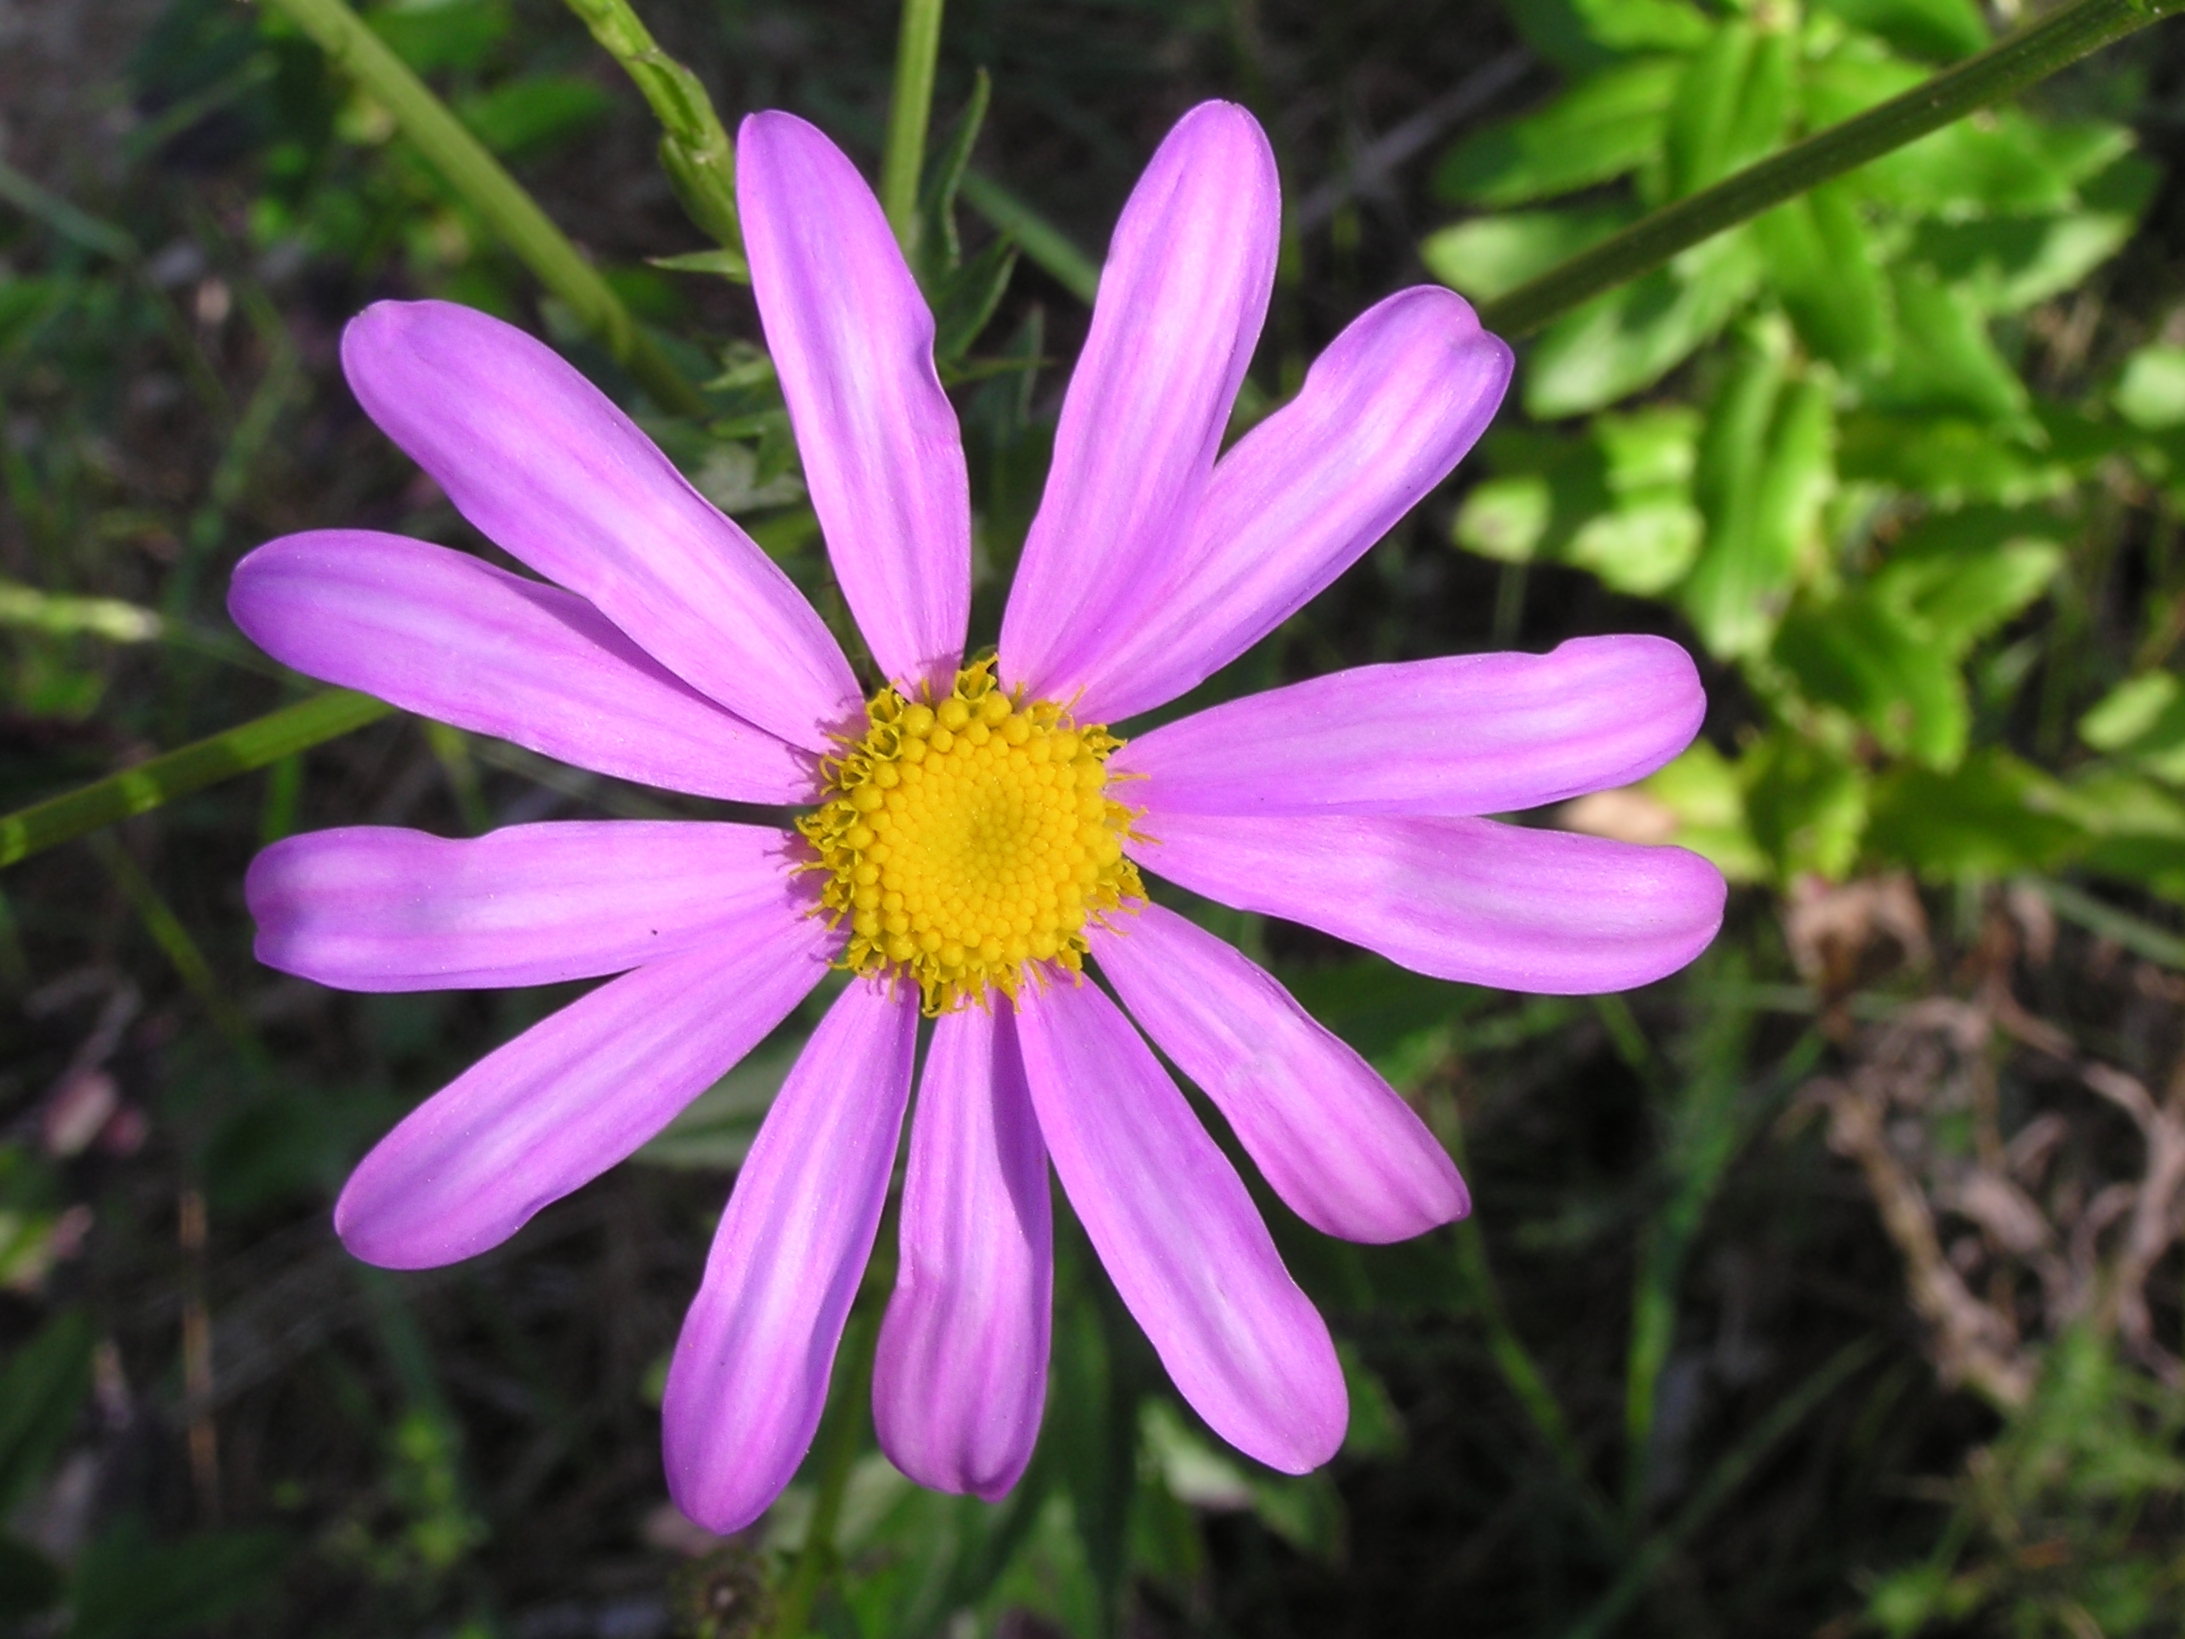 File:Mauve and yellow flower.jpg - Wikimedia Commons